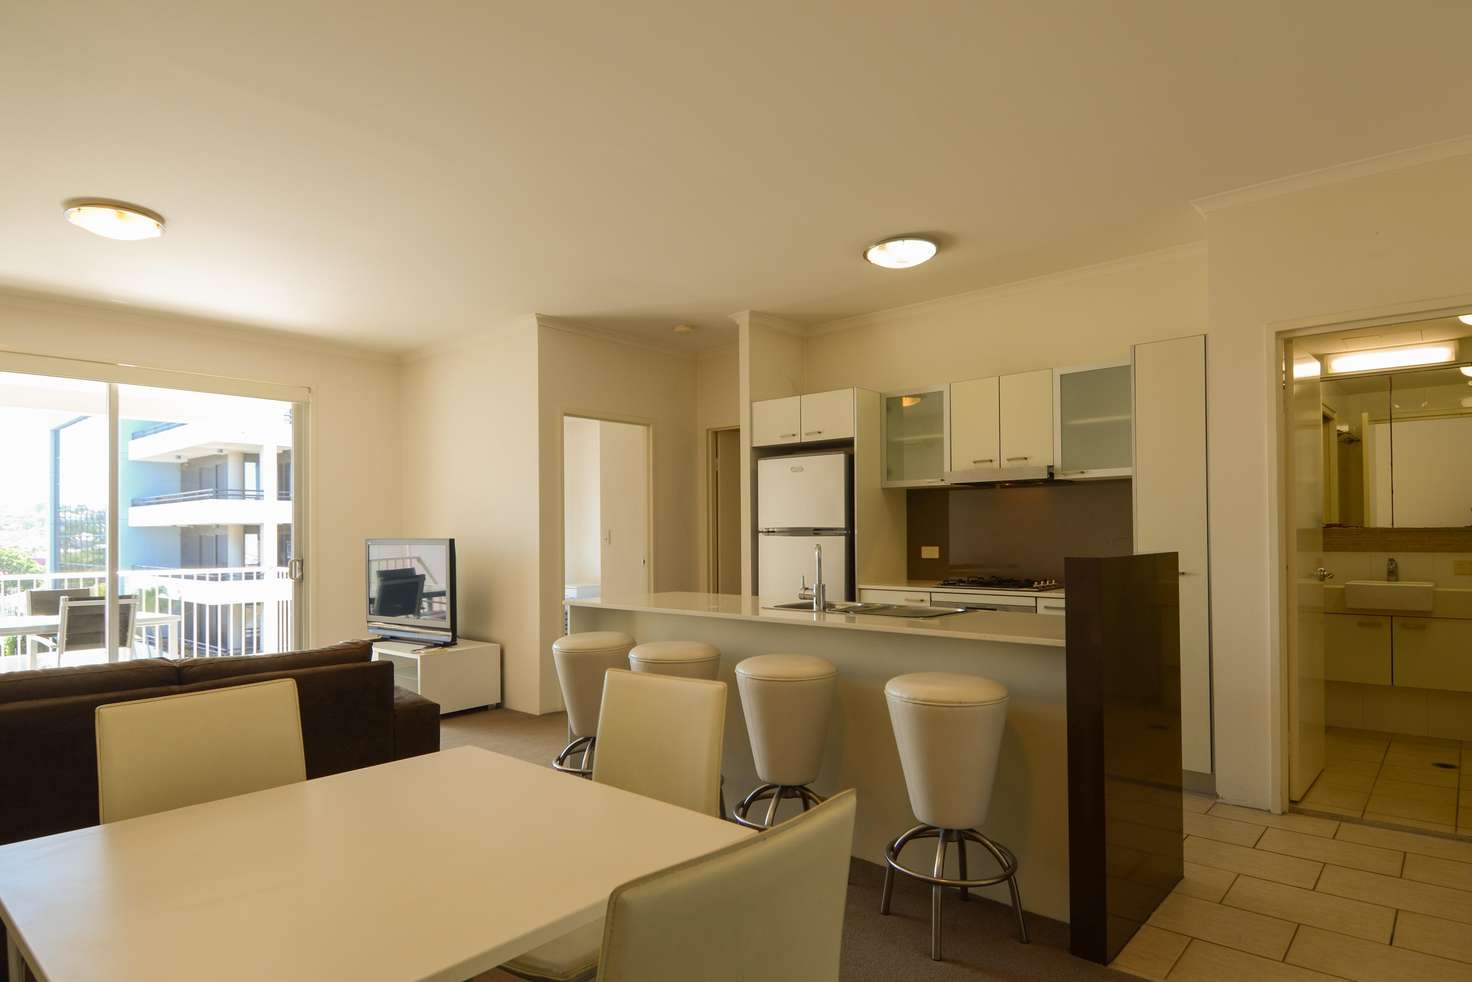 Main view of Homely apartment listing, 6 Exford St, Brisbane QLD 4000